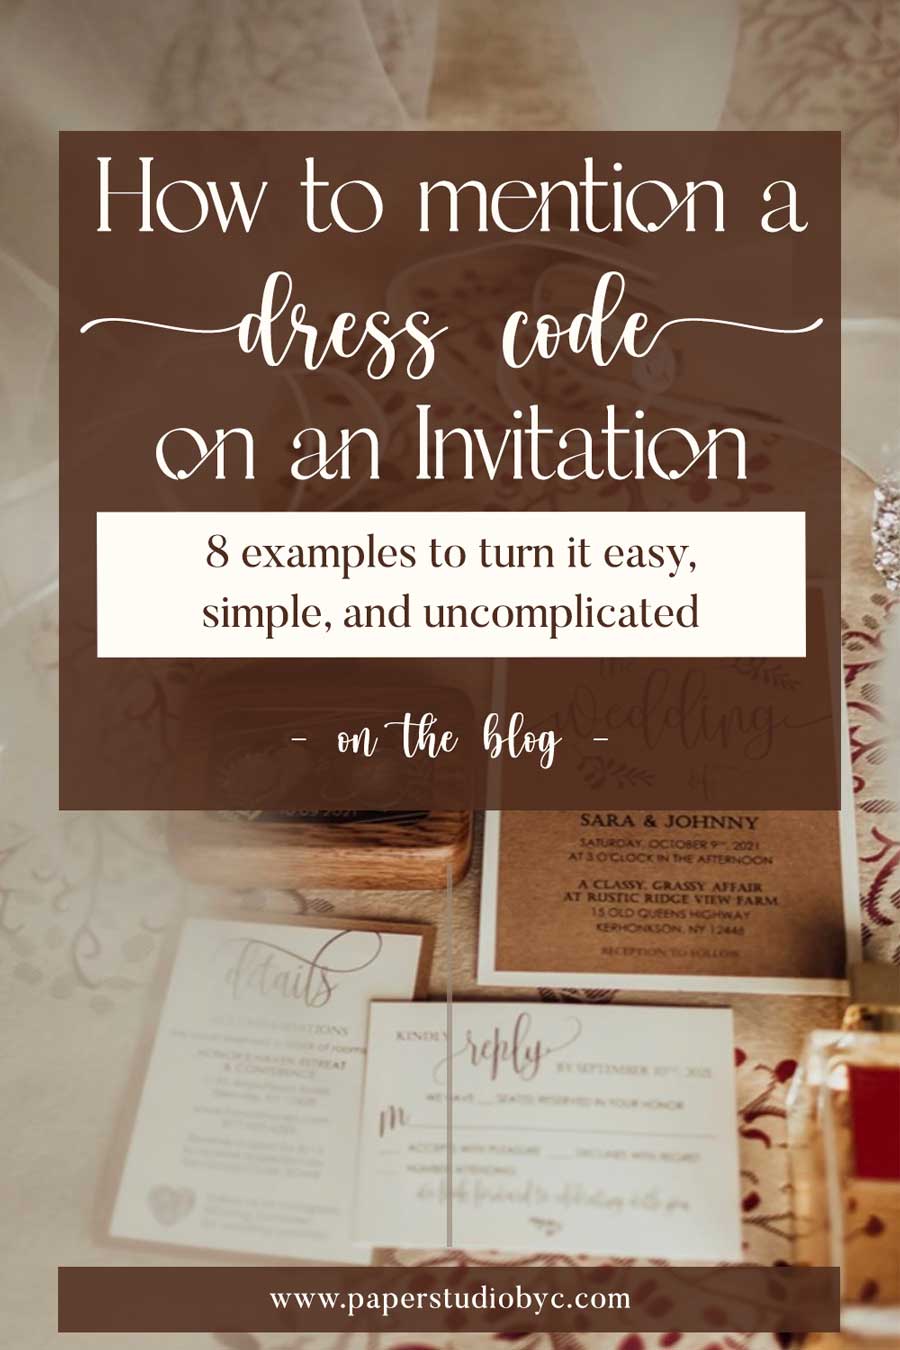 Wedding Invitation Trends for 2023: What's Hot and What's Not